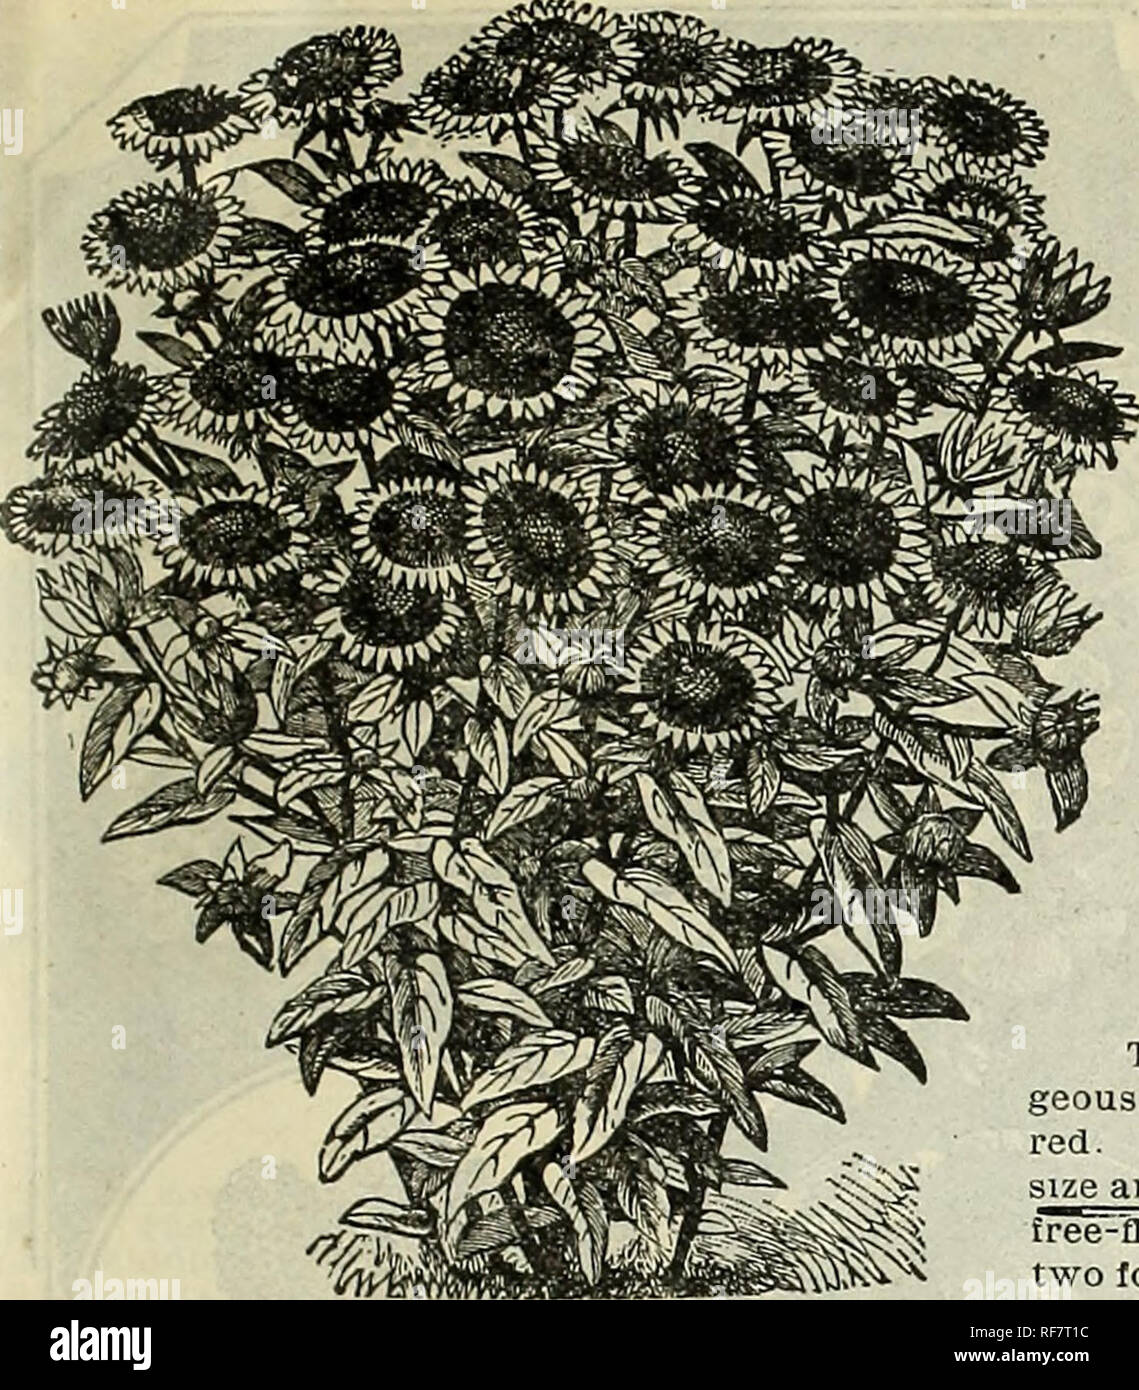 . Spring catalogue : 1900. Nurseries (Horticulture) Missouri Saint Louis Catalogs; Bulbs (Plants) Catalogs; Flowers Catalogs; Vegetables Seeds Catalogs; Plants, Ornamental Catalogs; Shrubs Catalogs; Fruit Catalogs. HARDY HERBACEOUS PLANTS 89. COREOPSIS LANCEOLATA This plant makes a dense tuft of glossy foliage,which is rich and bright until hard frosts, bearing blossoms of the most brilliant golden yellow, as large as a silver dollar; entirely hardy and will grow in any soil (see cut). Price, 15c each; two for 25c; per doz., $1.50. PHLOX SUBULATA » (Moss Pink) white—A beautiful, pure white for Stock Photo